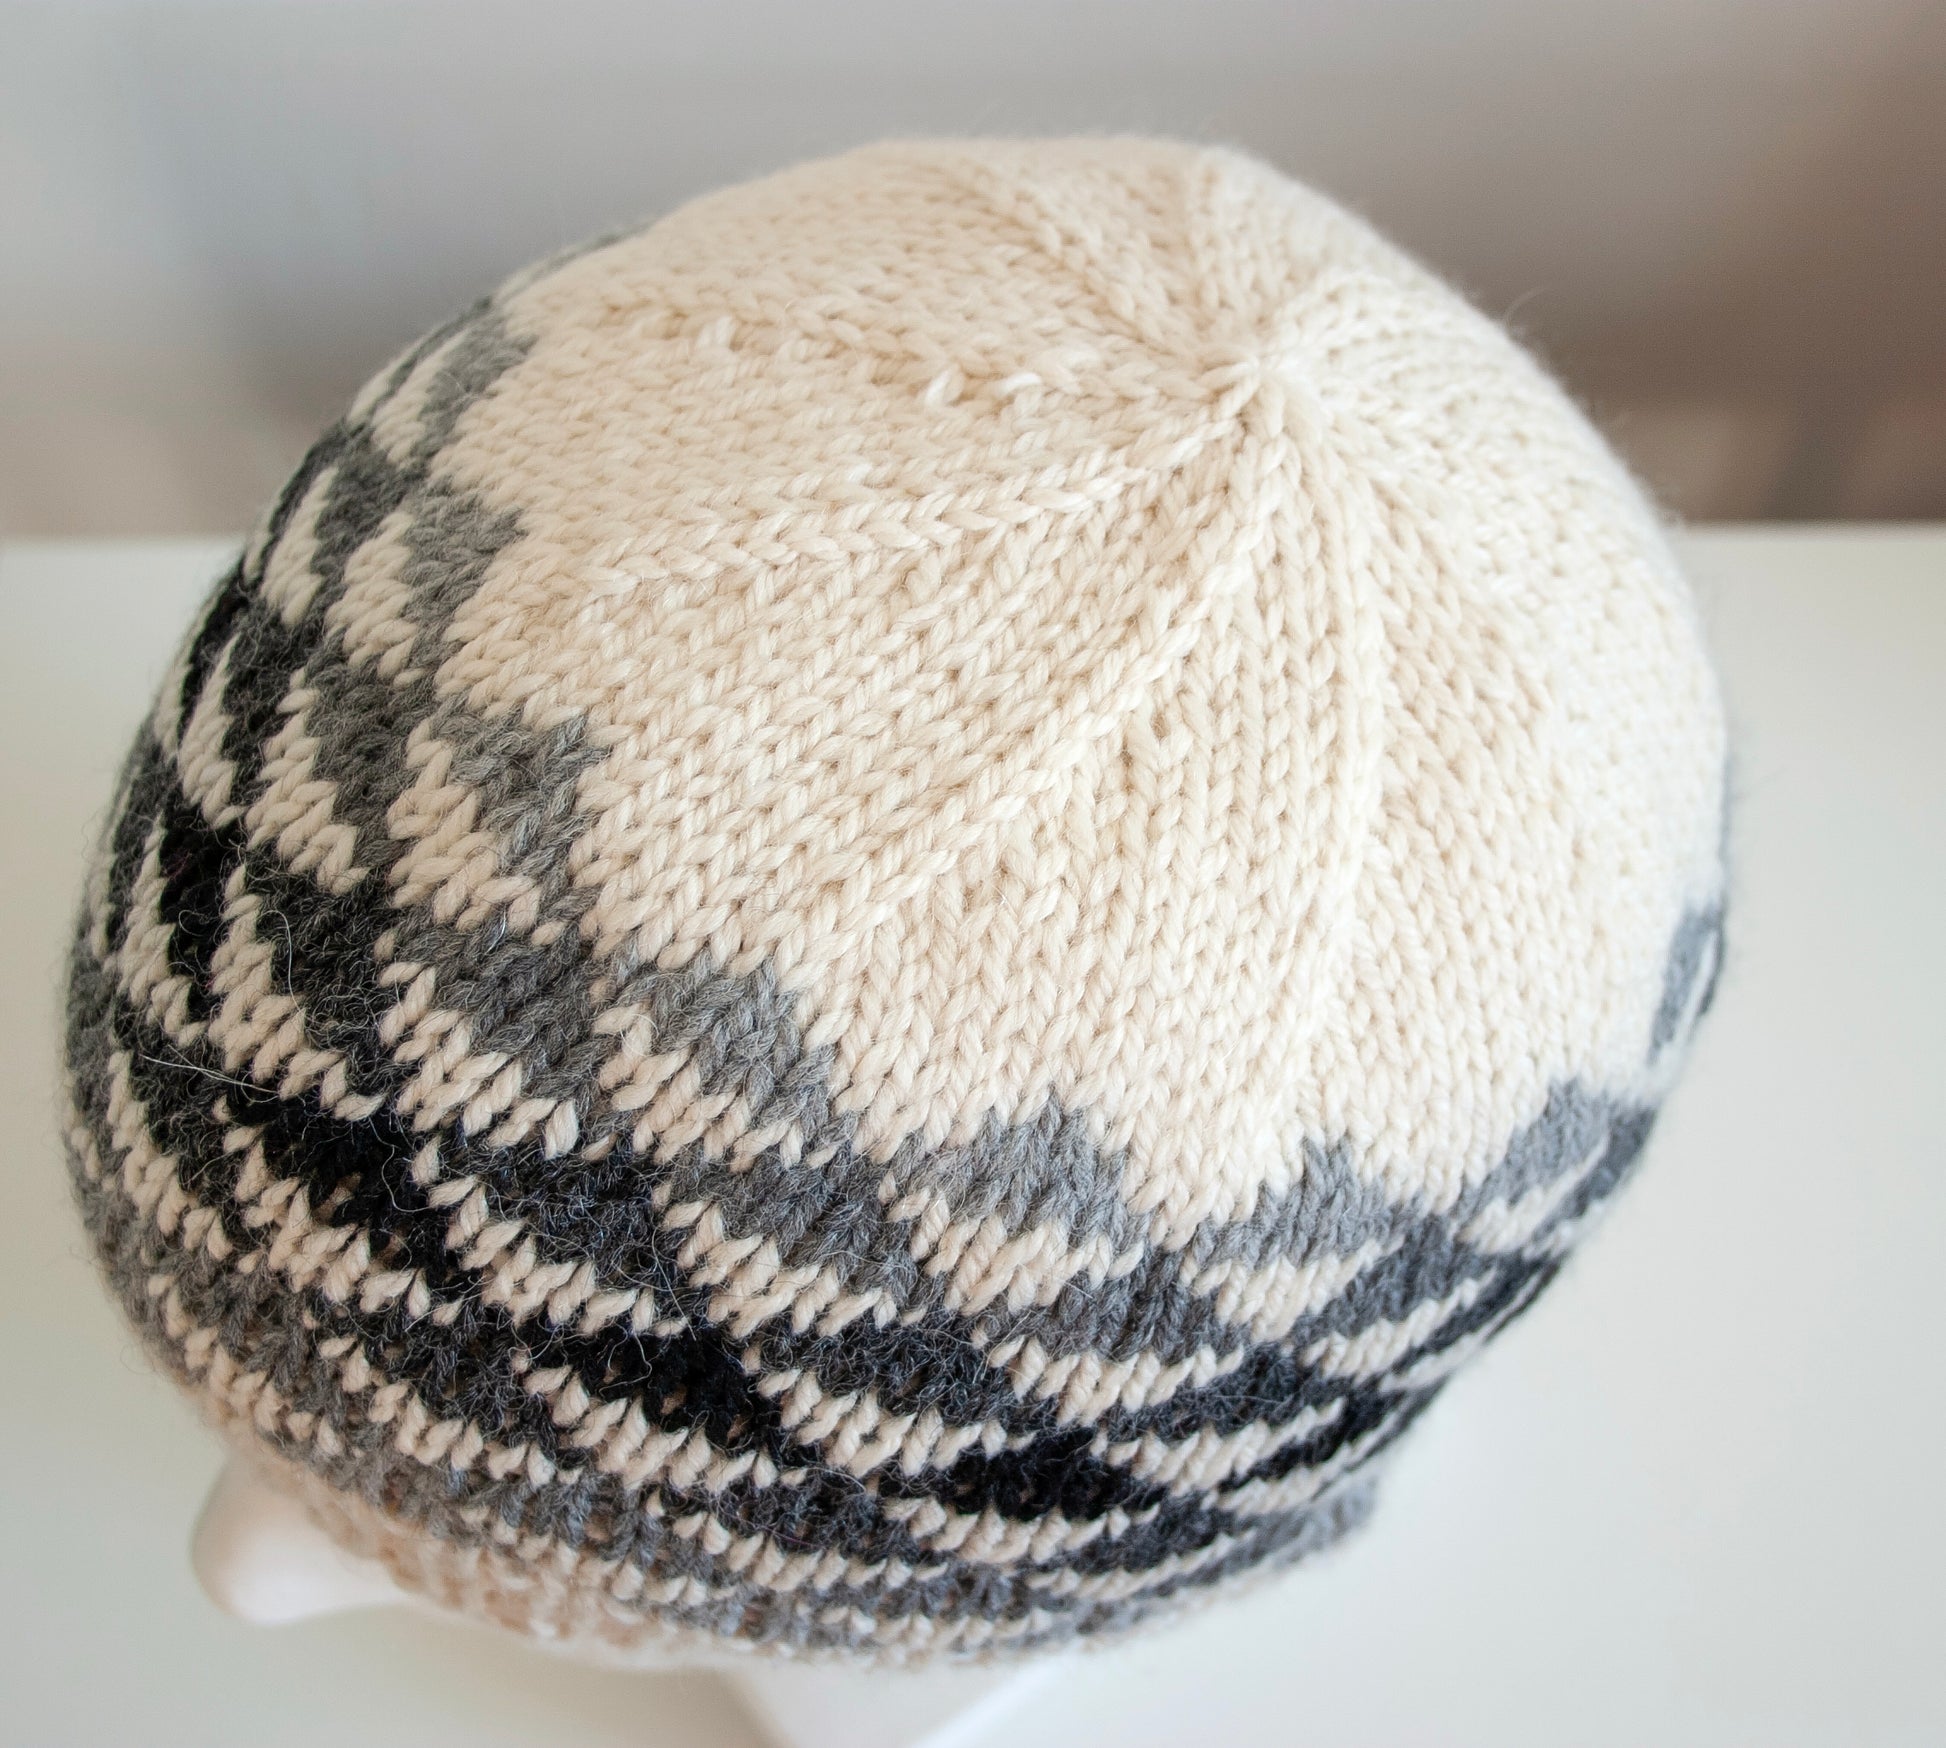 white, grey and black wool hand-knitted Fair Isle beanie hat in triangles knitting pattern, top view